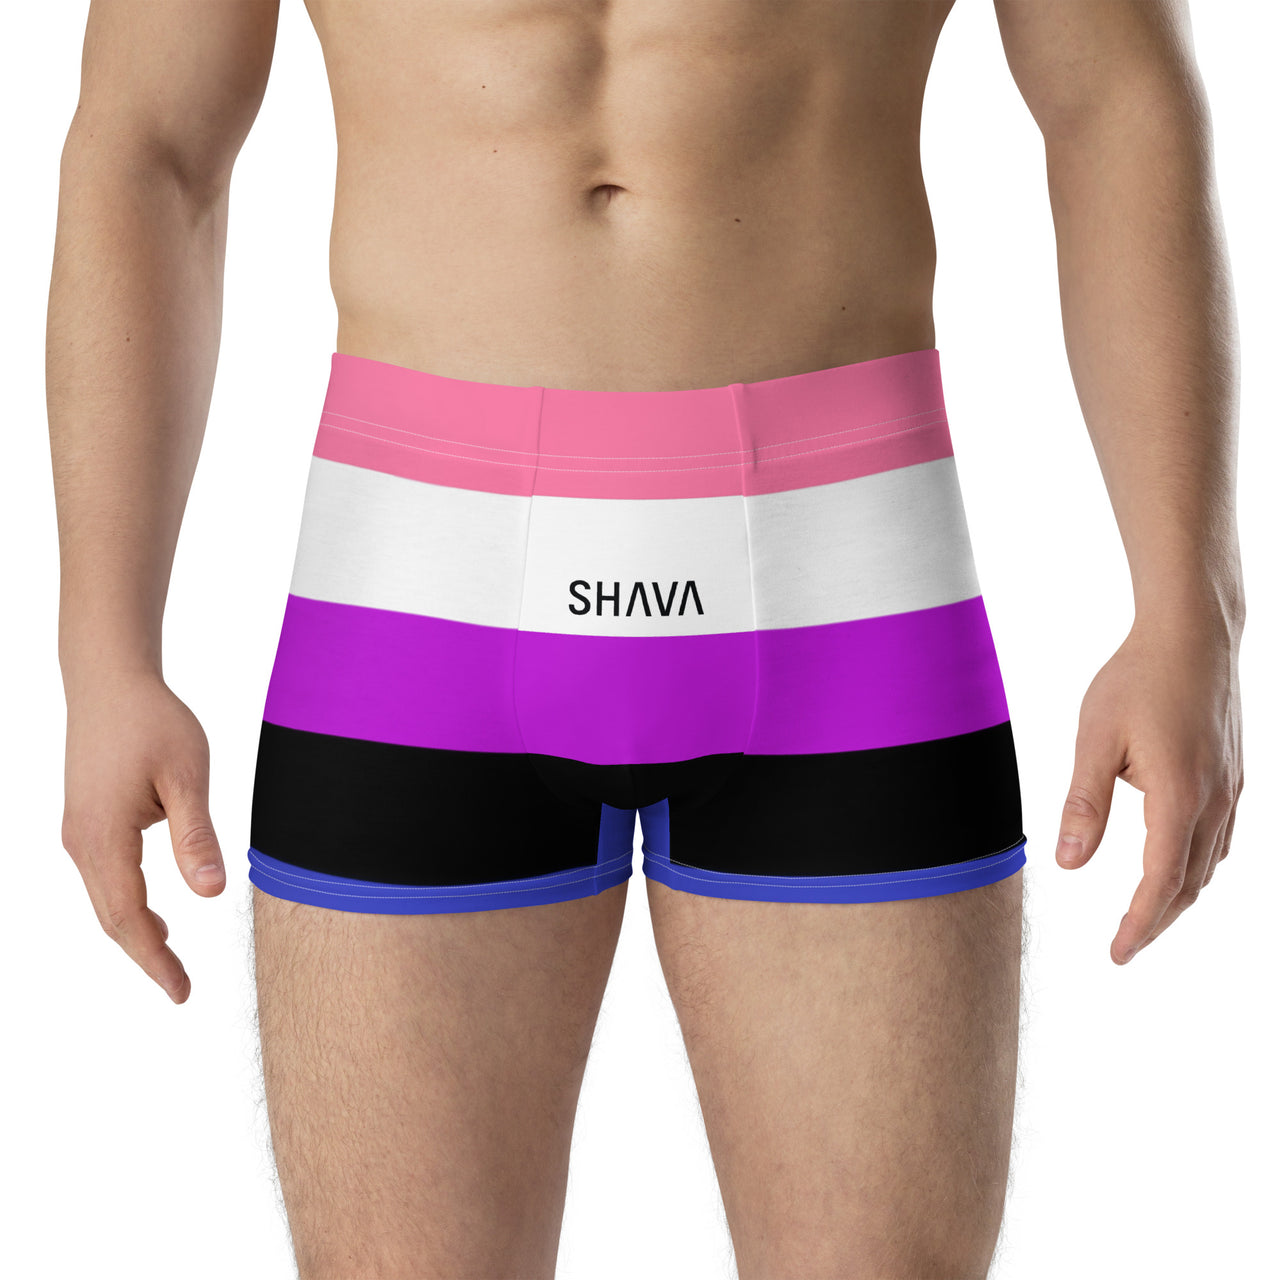 Genderfluid Flag LGBTQ Boxer for Her/Him or They/Them SHAVA